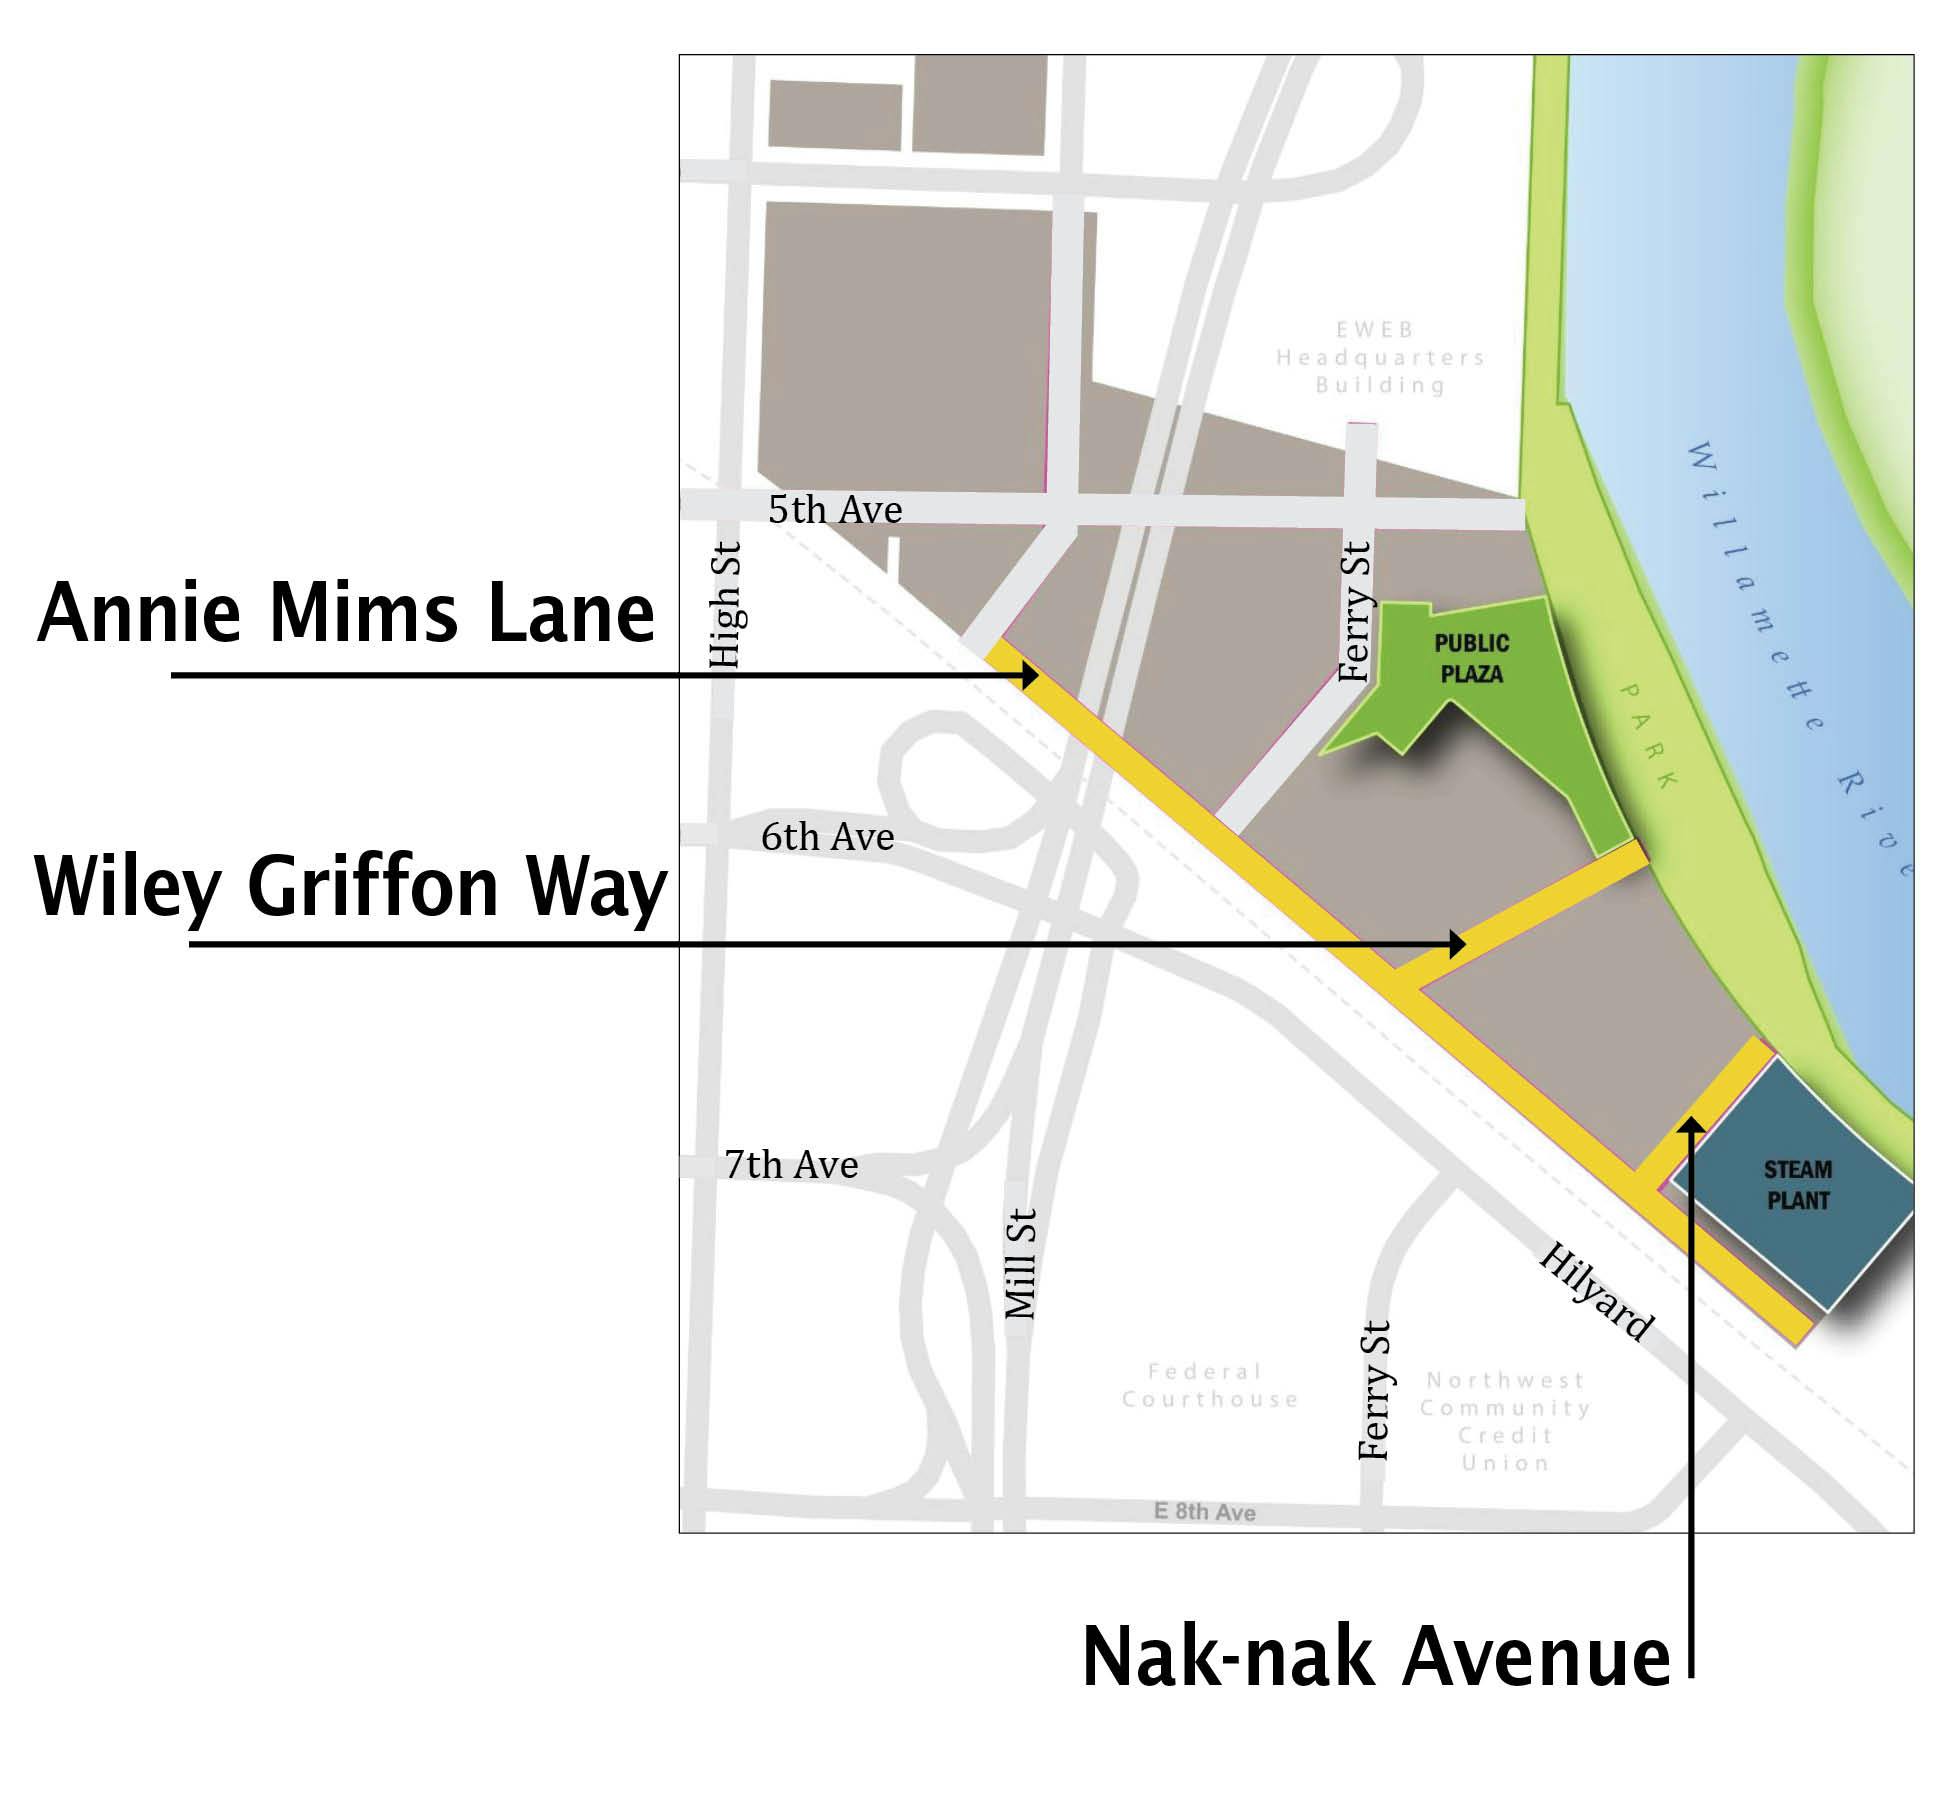 Annie Mims Lane, Nak-nak Avenue and Wiley Griffon Way will be located on the redeveloped Downtown Riverfront property. 